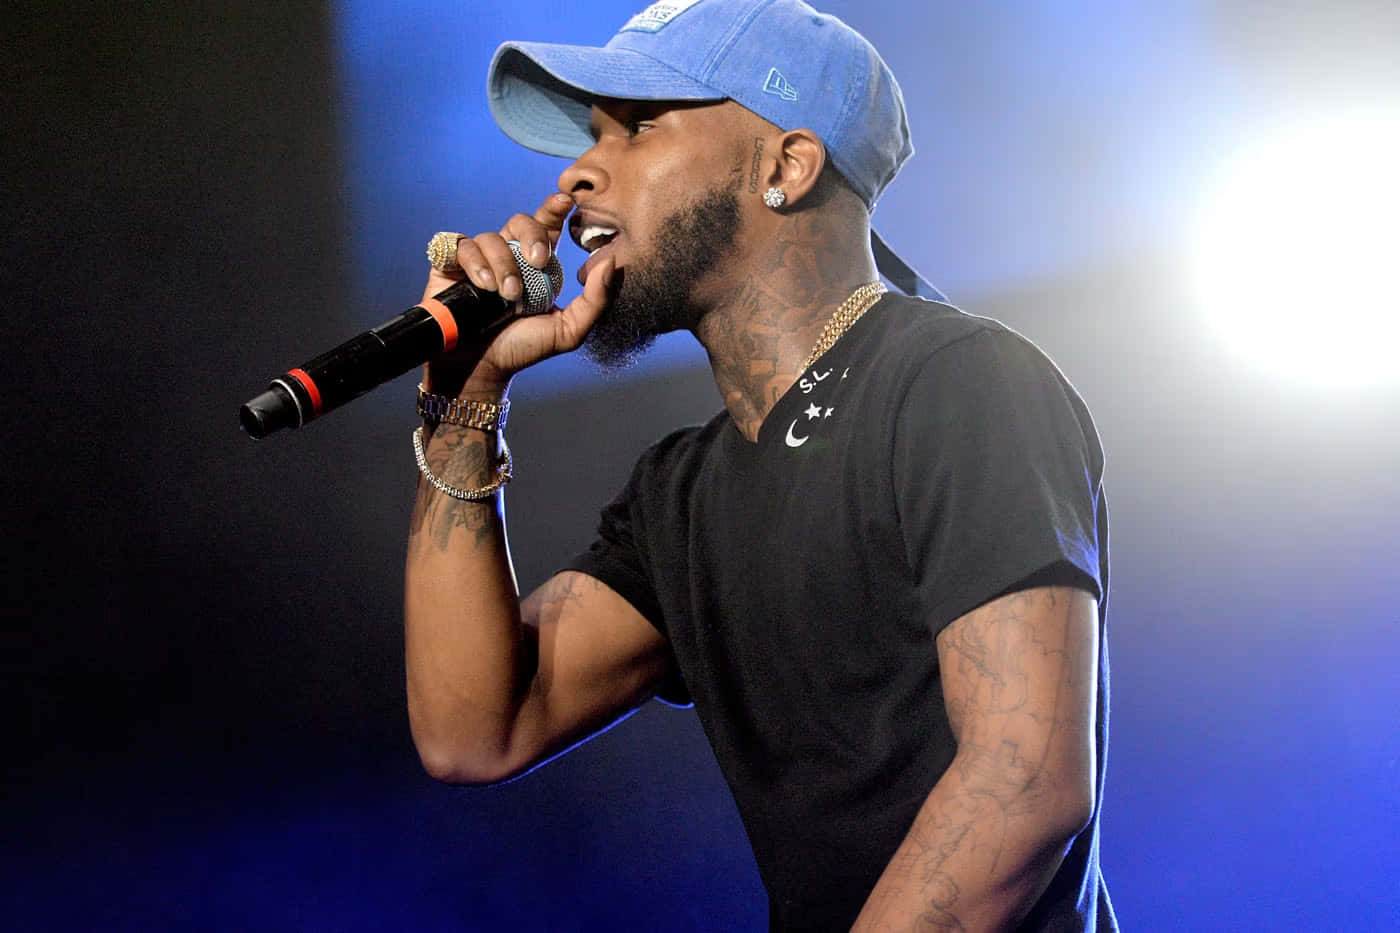 Tory Lanez Performing Liveon Stage Wallpaper